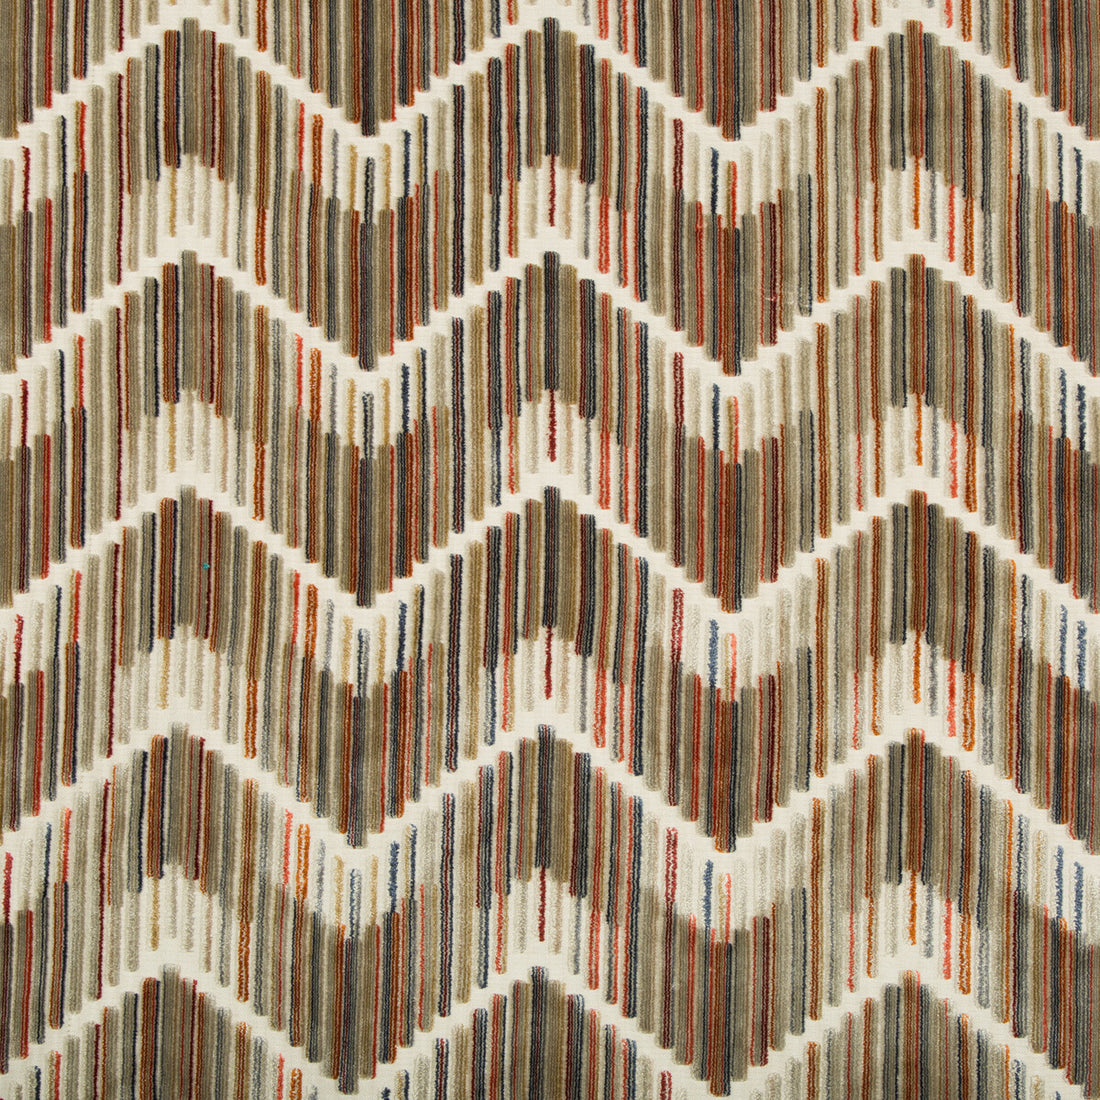 Highs And Lows fabric in amber color - pattern 34553.24.0 - by Kravet Couture in the Artisan Velvets collection